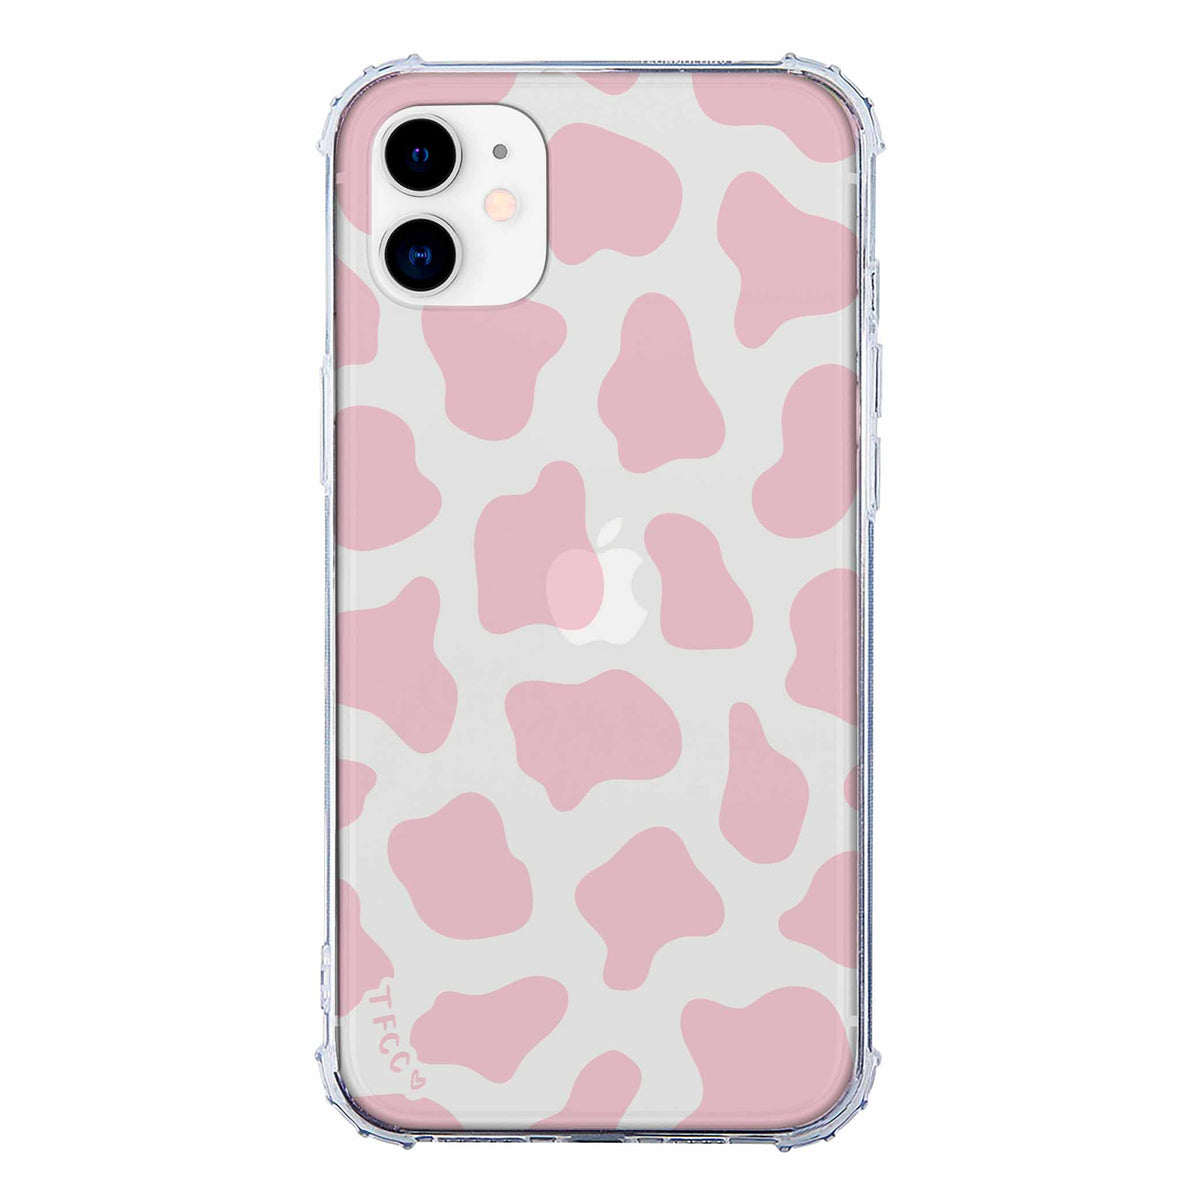 COW PRINT PINK CLEAR CASE - thefonecasecompany